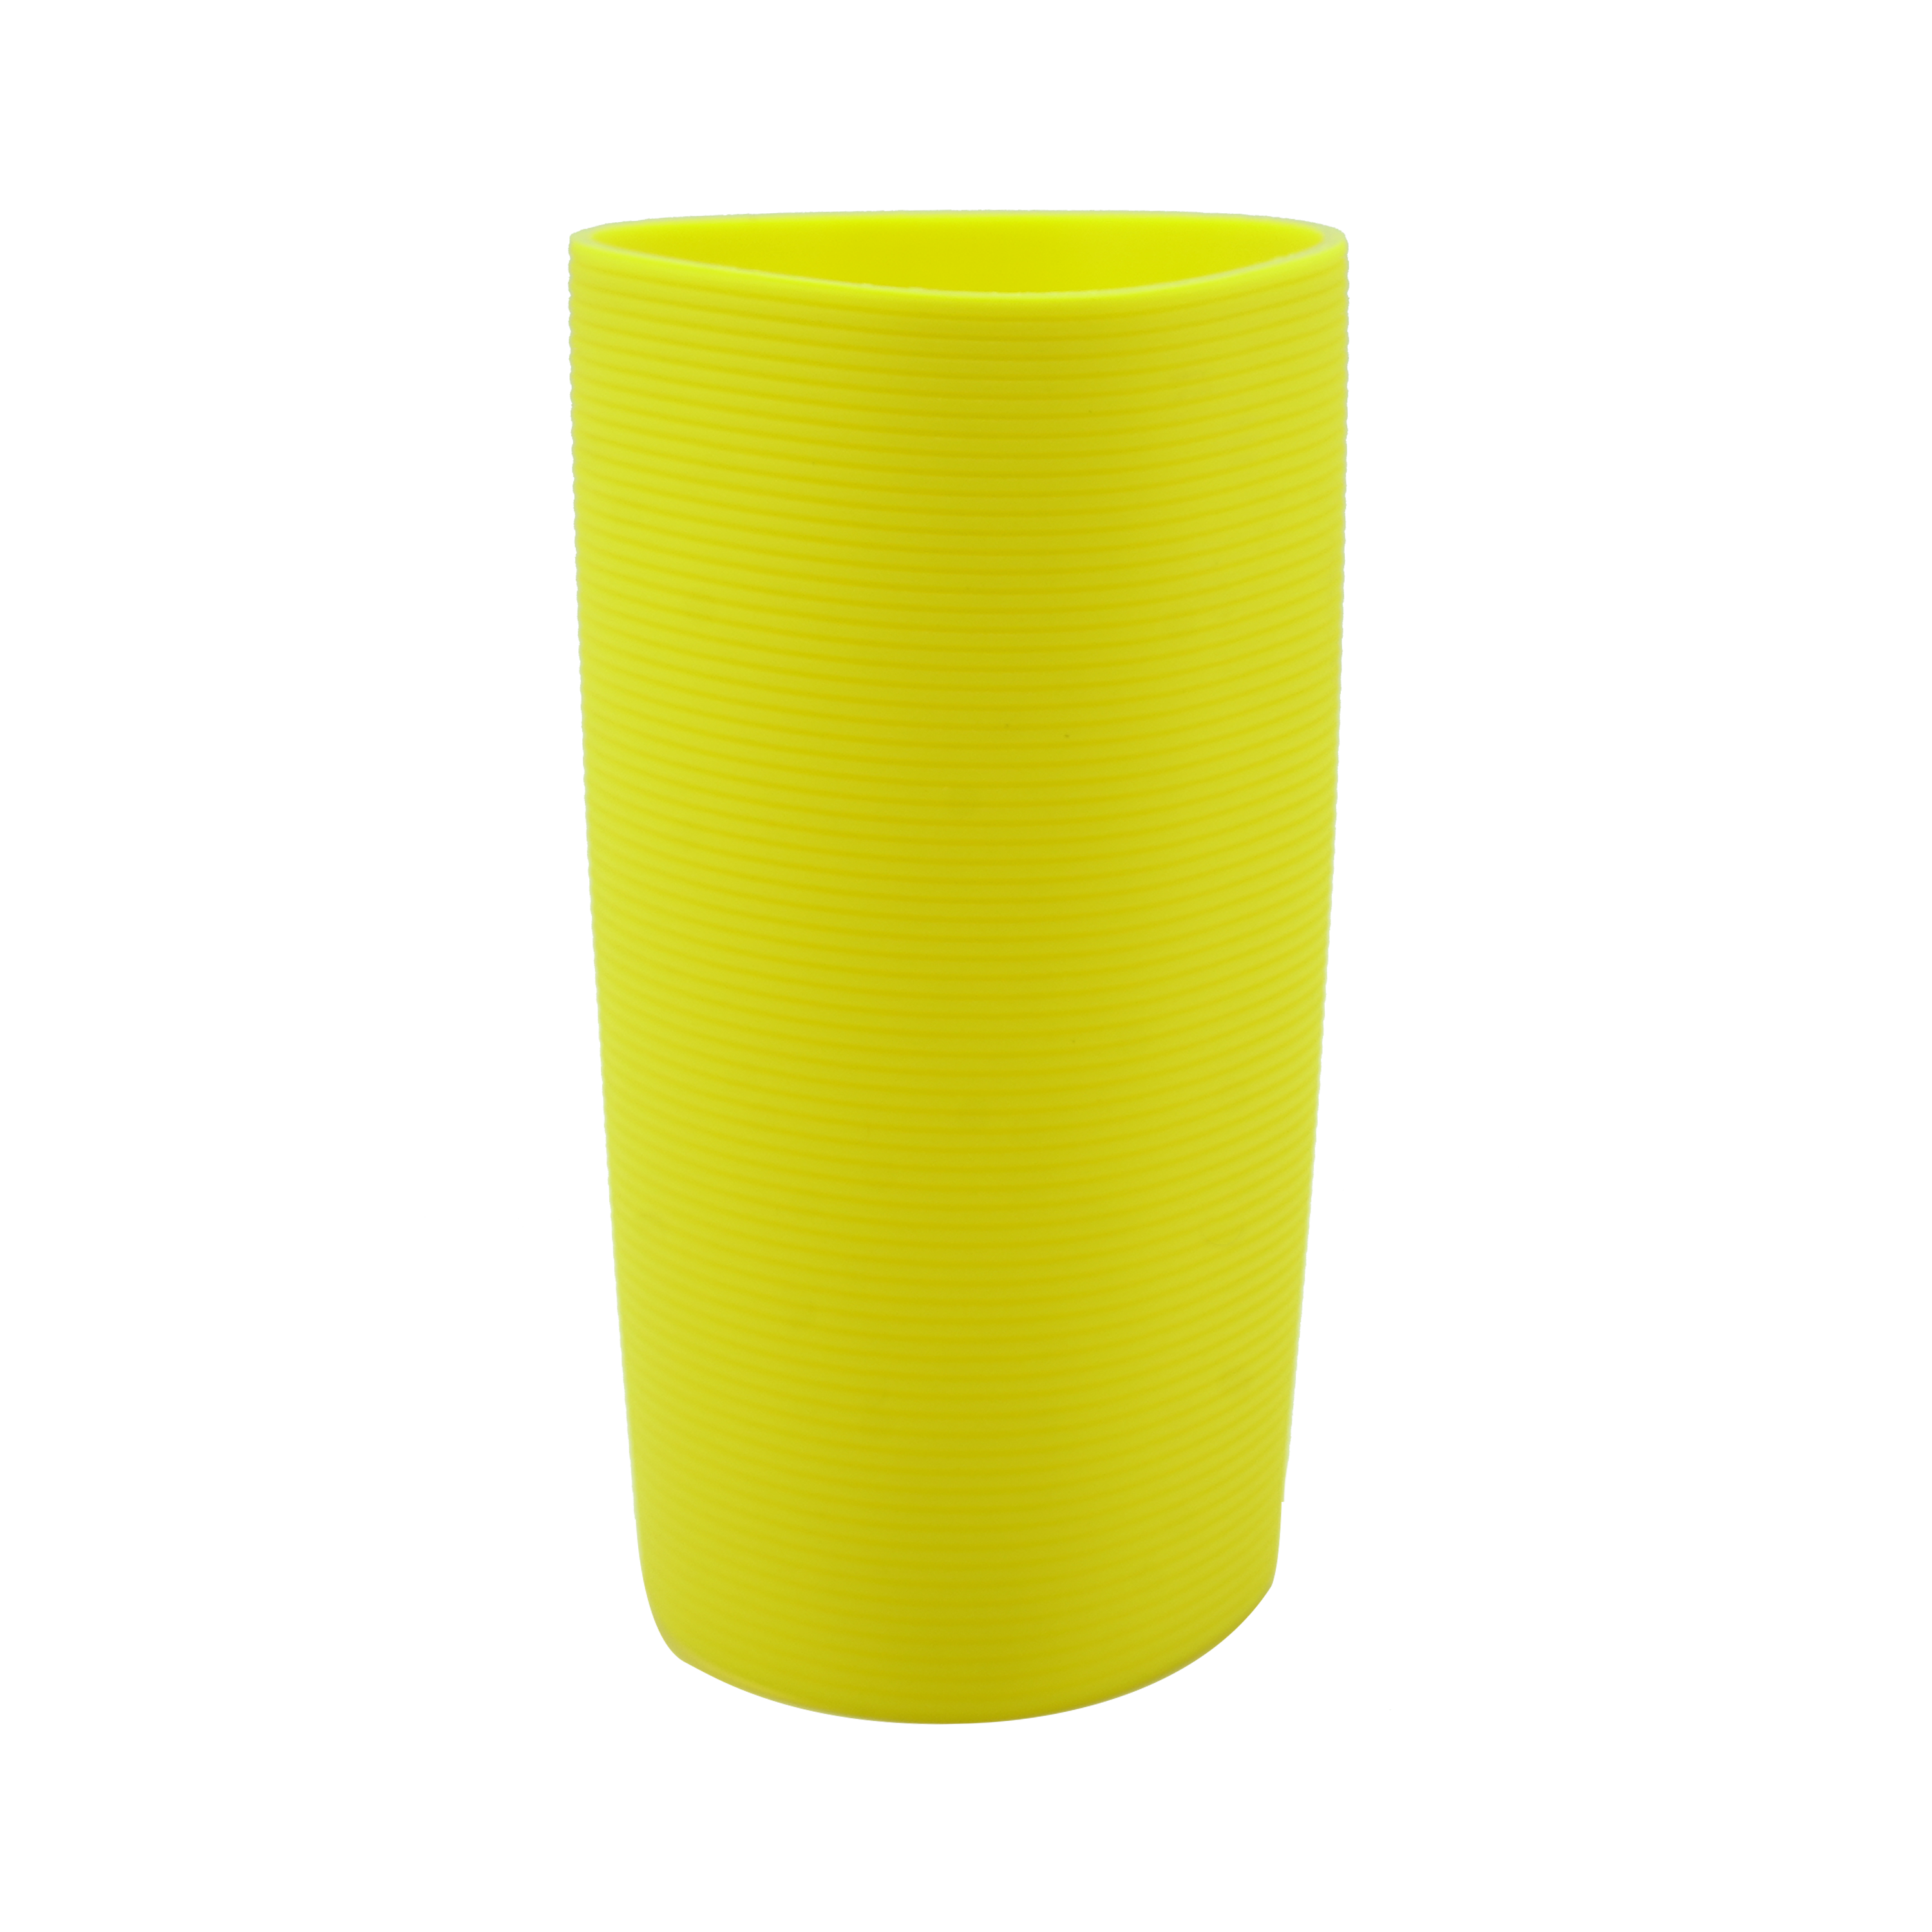 VIVA Sleeve for other brands tumblers and cups – Lee Fisher Fishing Supply